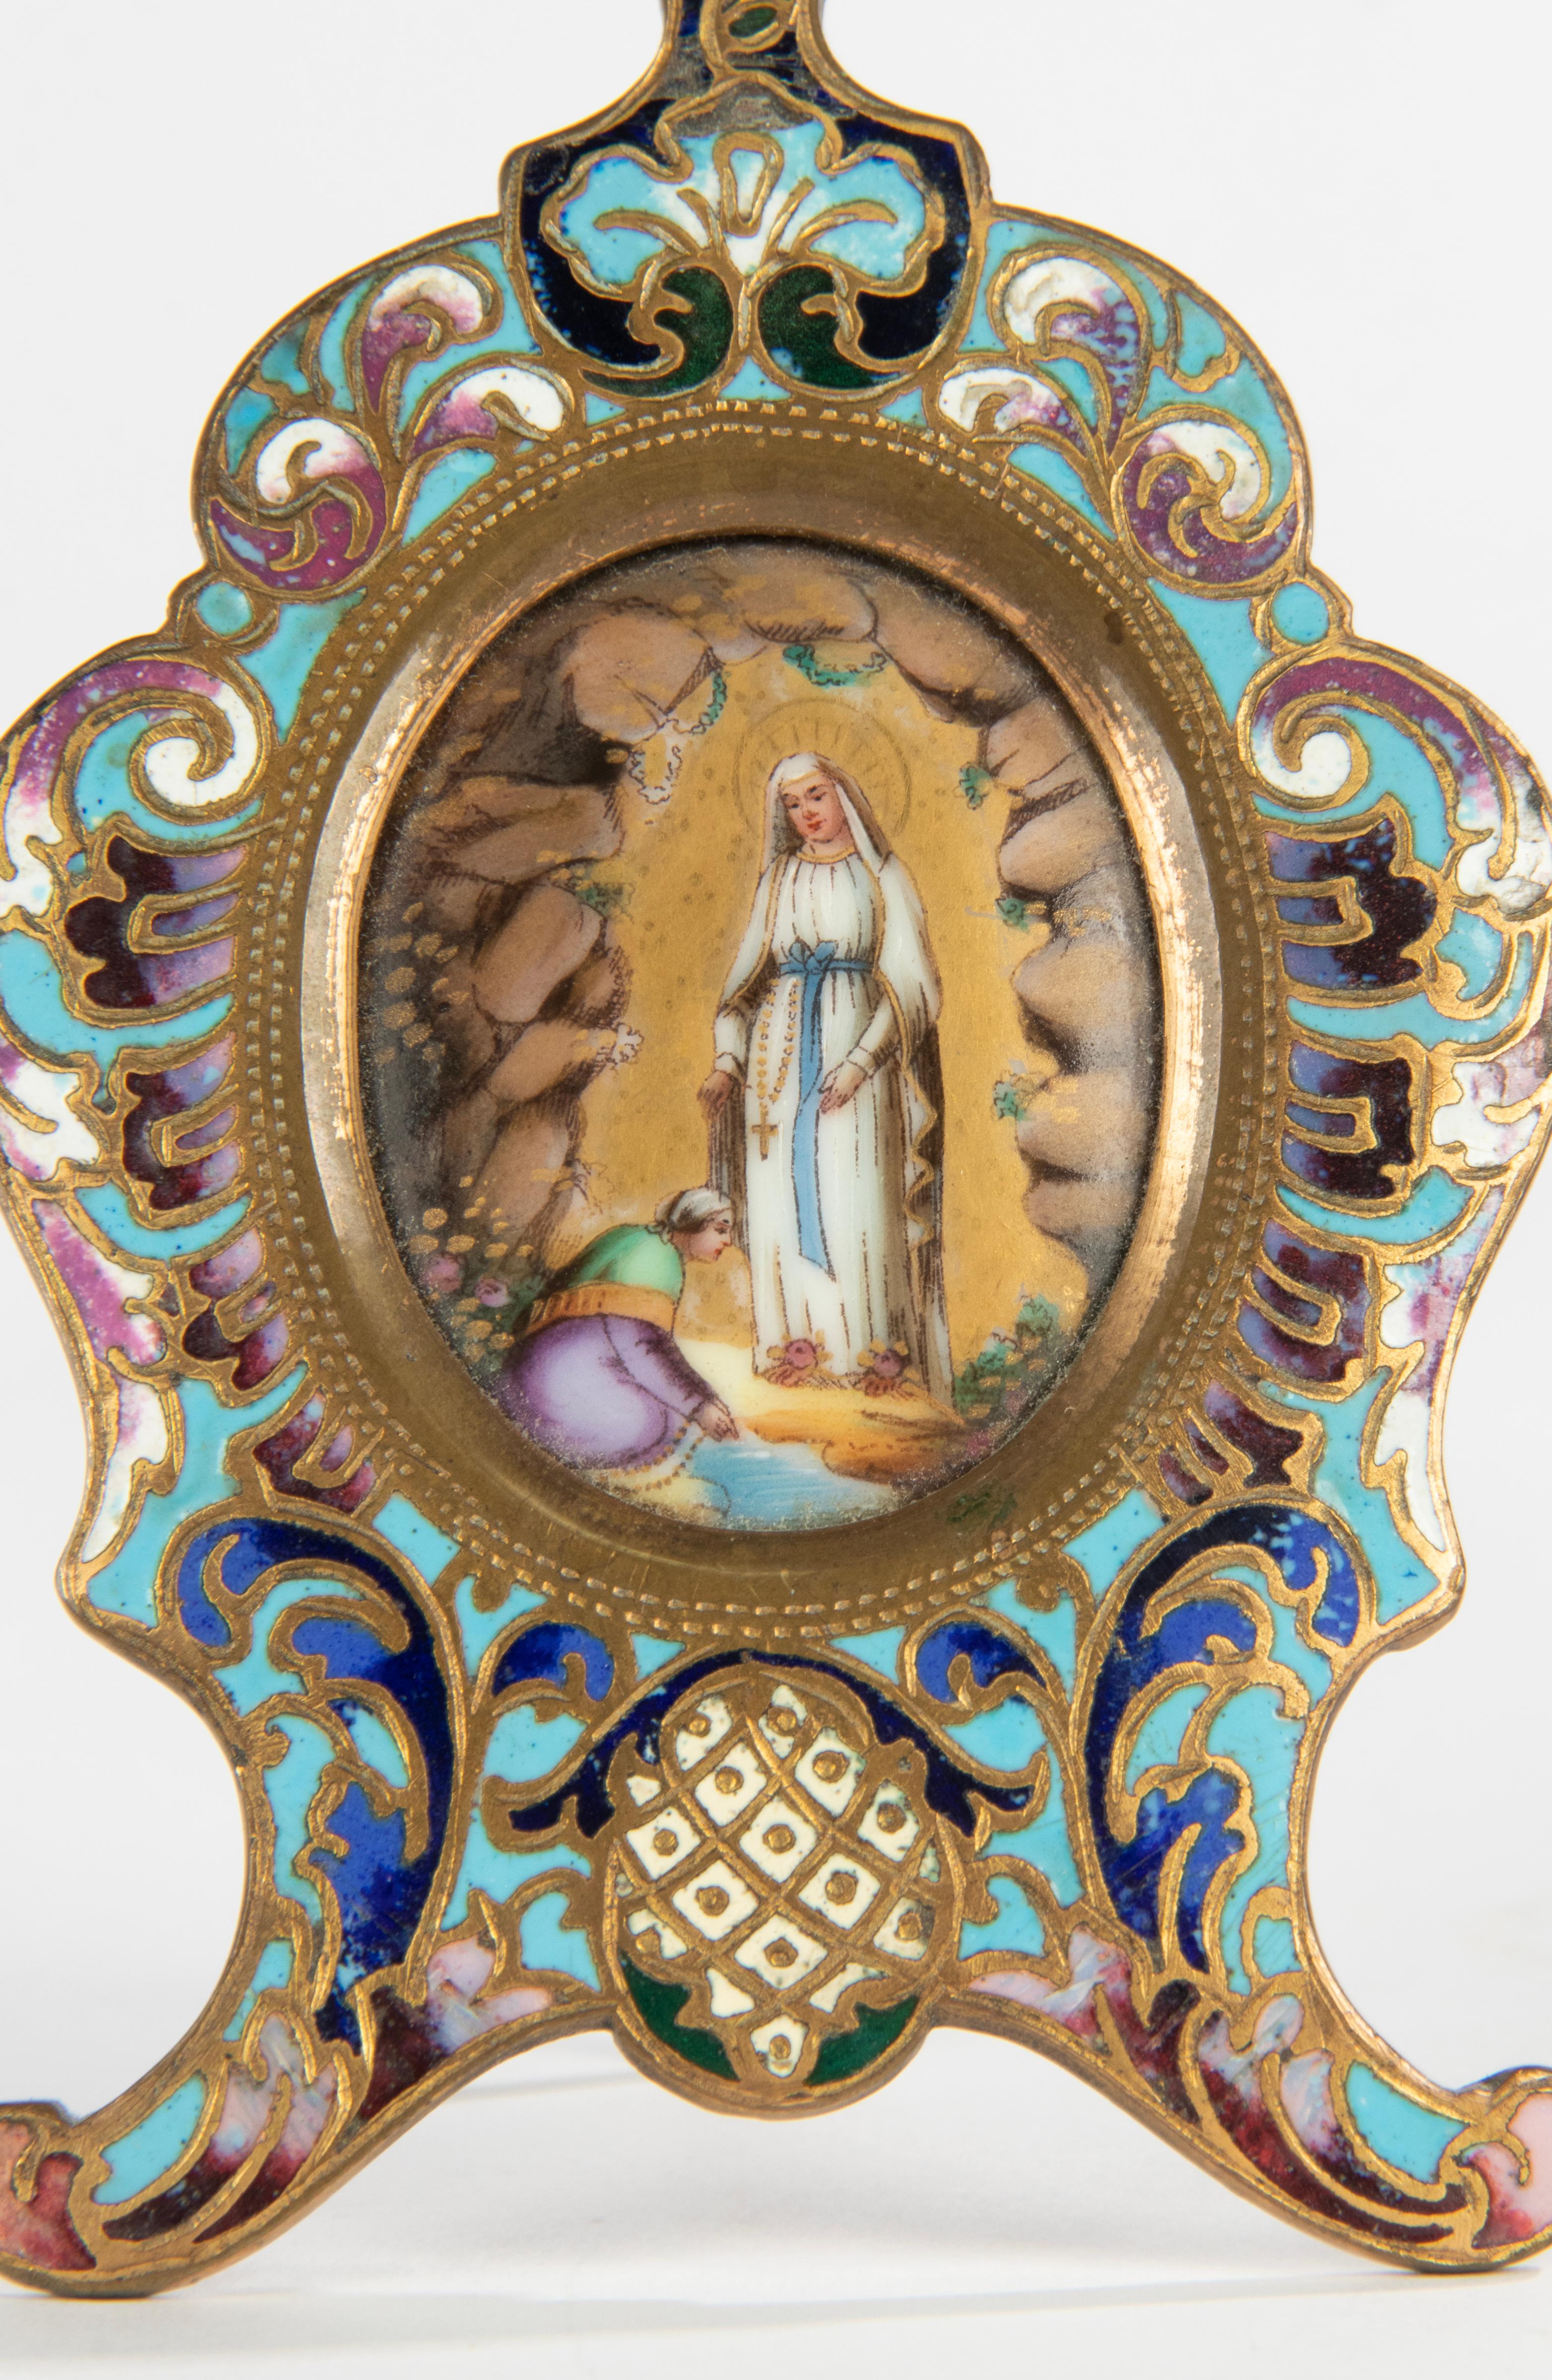 A small and refined Cloissoné enameled plaque stand. It is centered by an oval hand-painted portrait of the Madonna and Child. Made of copper with enamel inlays. Made in France, circa 1880-1890. In good condition with no signs of damage or